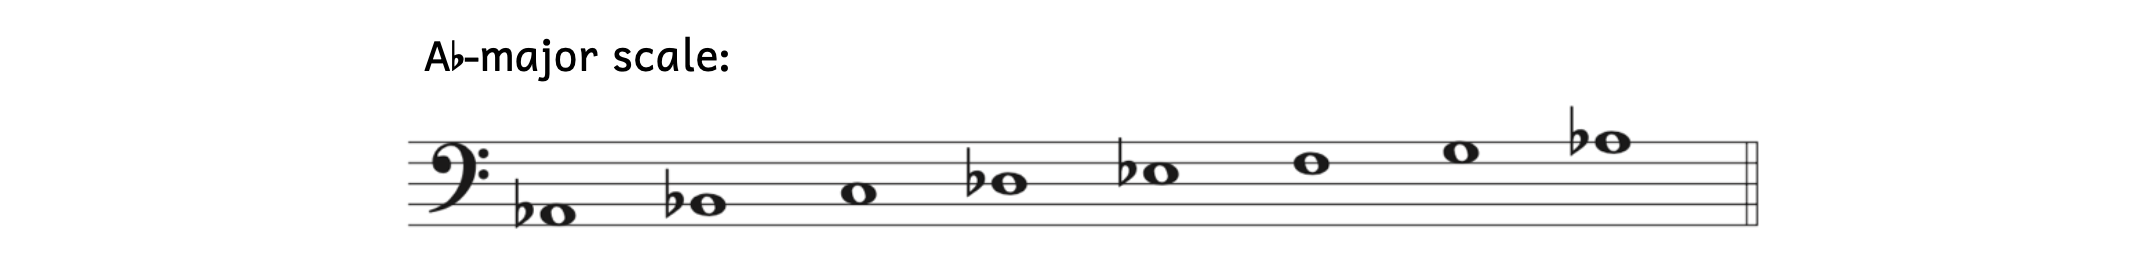 A-flat major scale with accidentals. The notes are A-flat, B-flat, C, D-flat, E-flat, F, G, and A-flat.